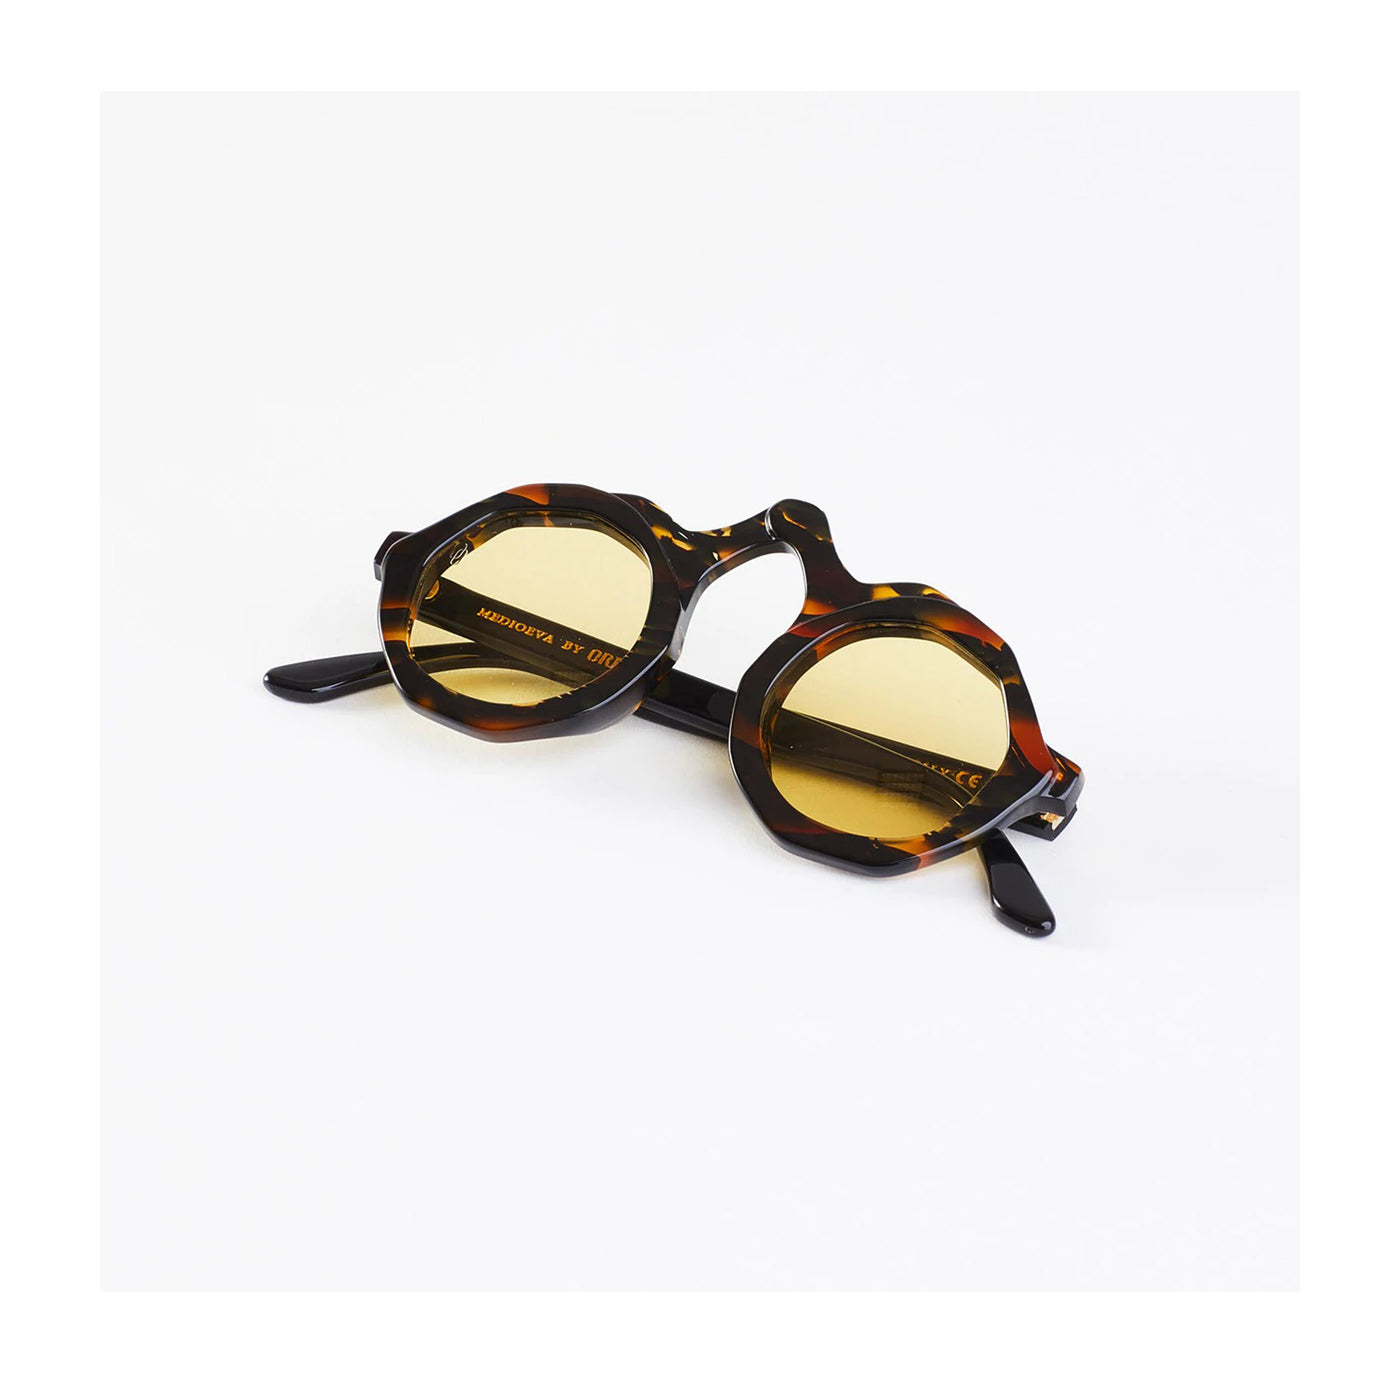 Sunglasses MEDIOEVA by Orequo - Limited Edition 03